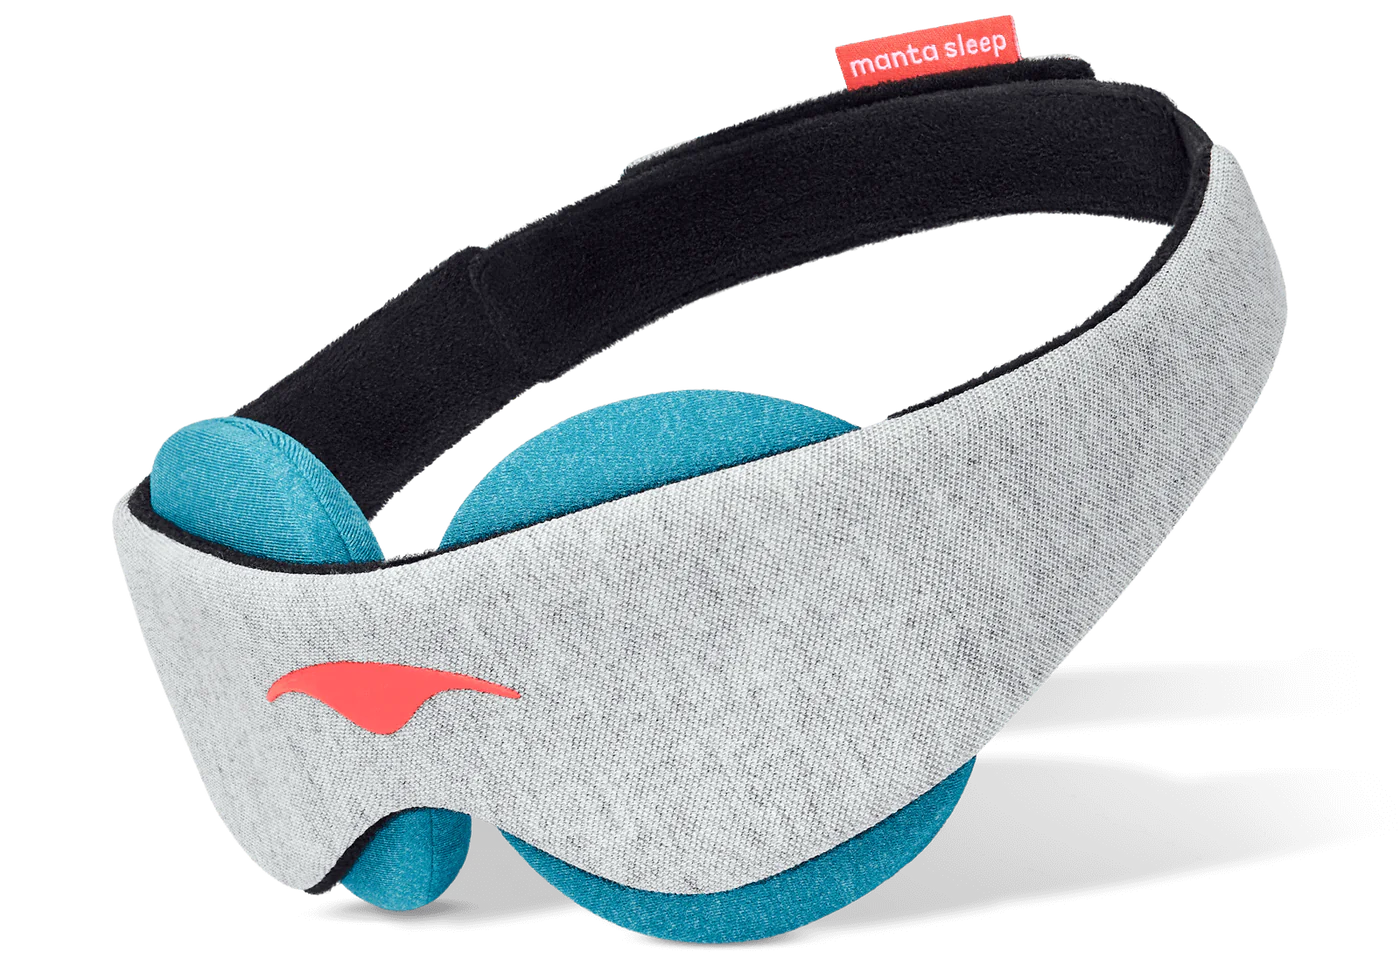 A gray cooling sleep mask with blue eye cups for allergy relief.